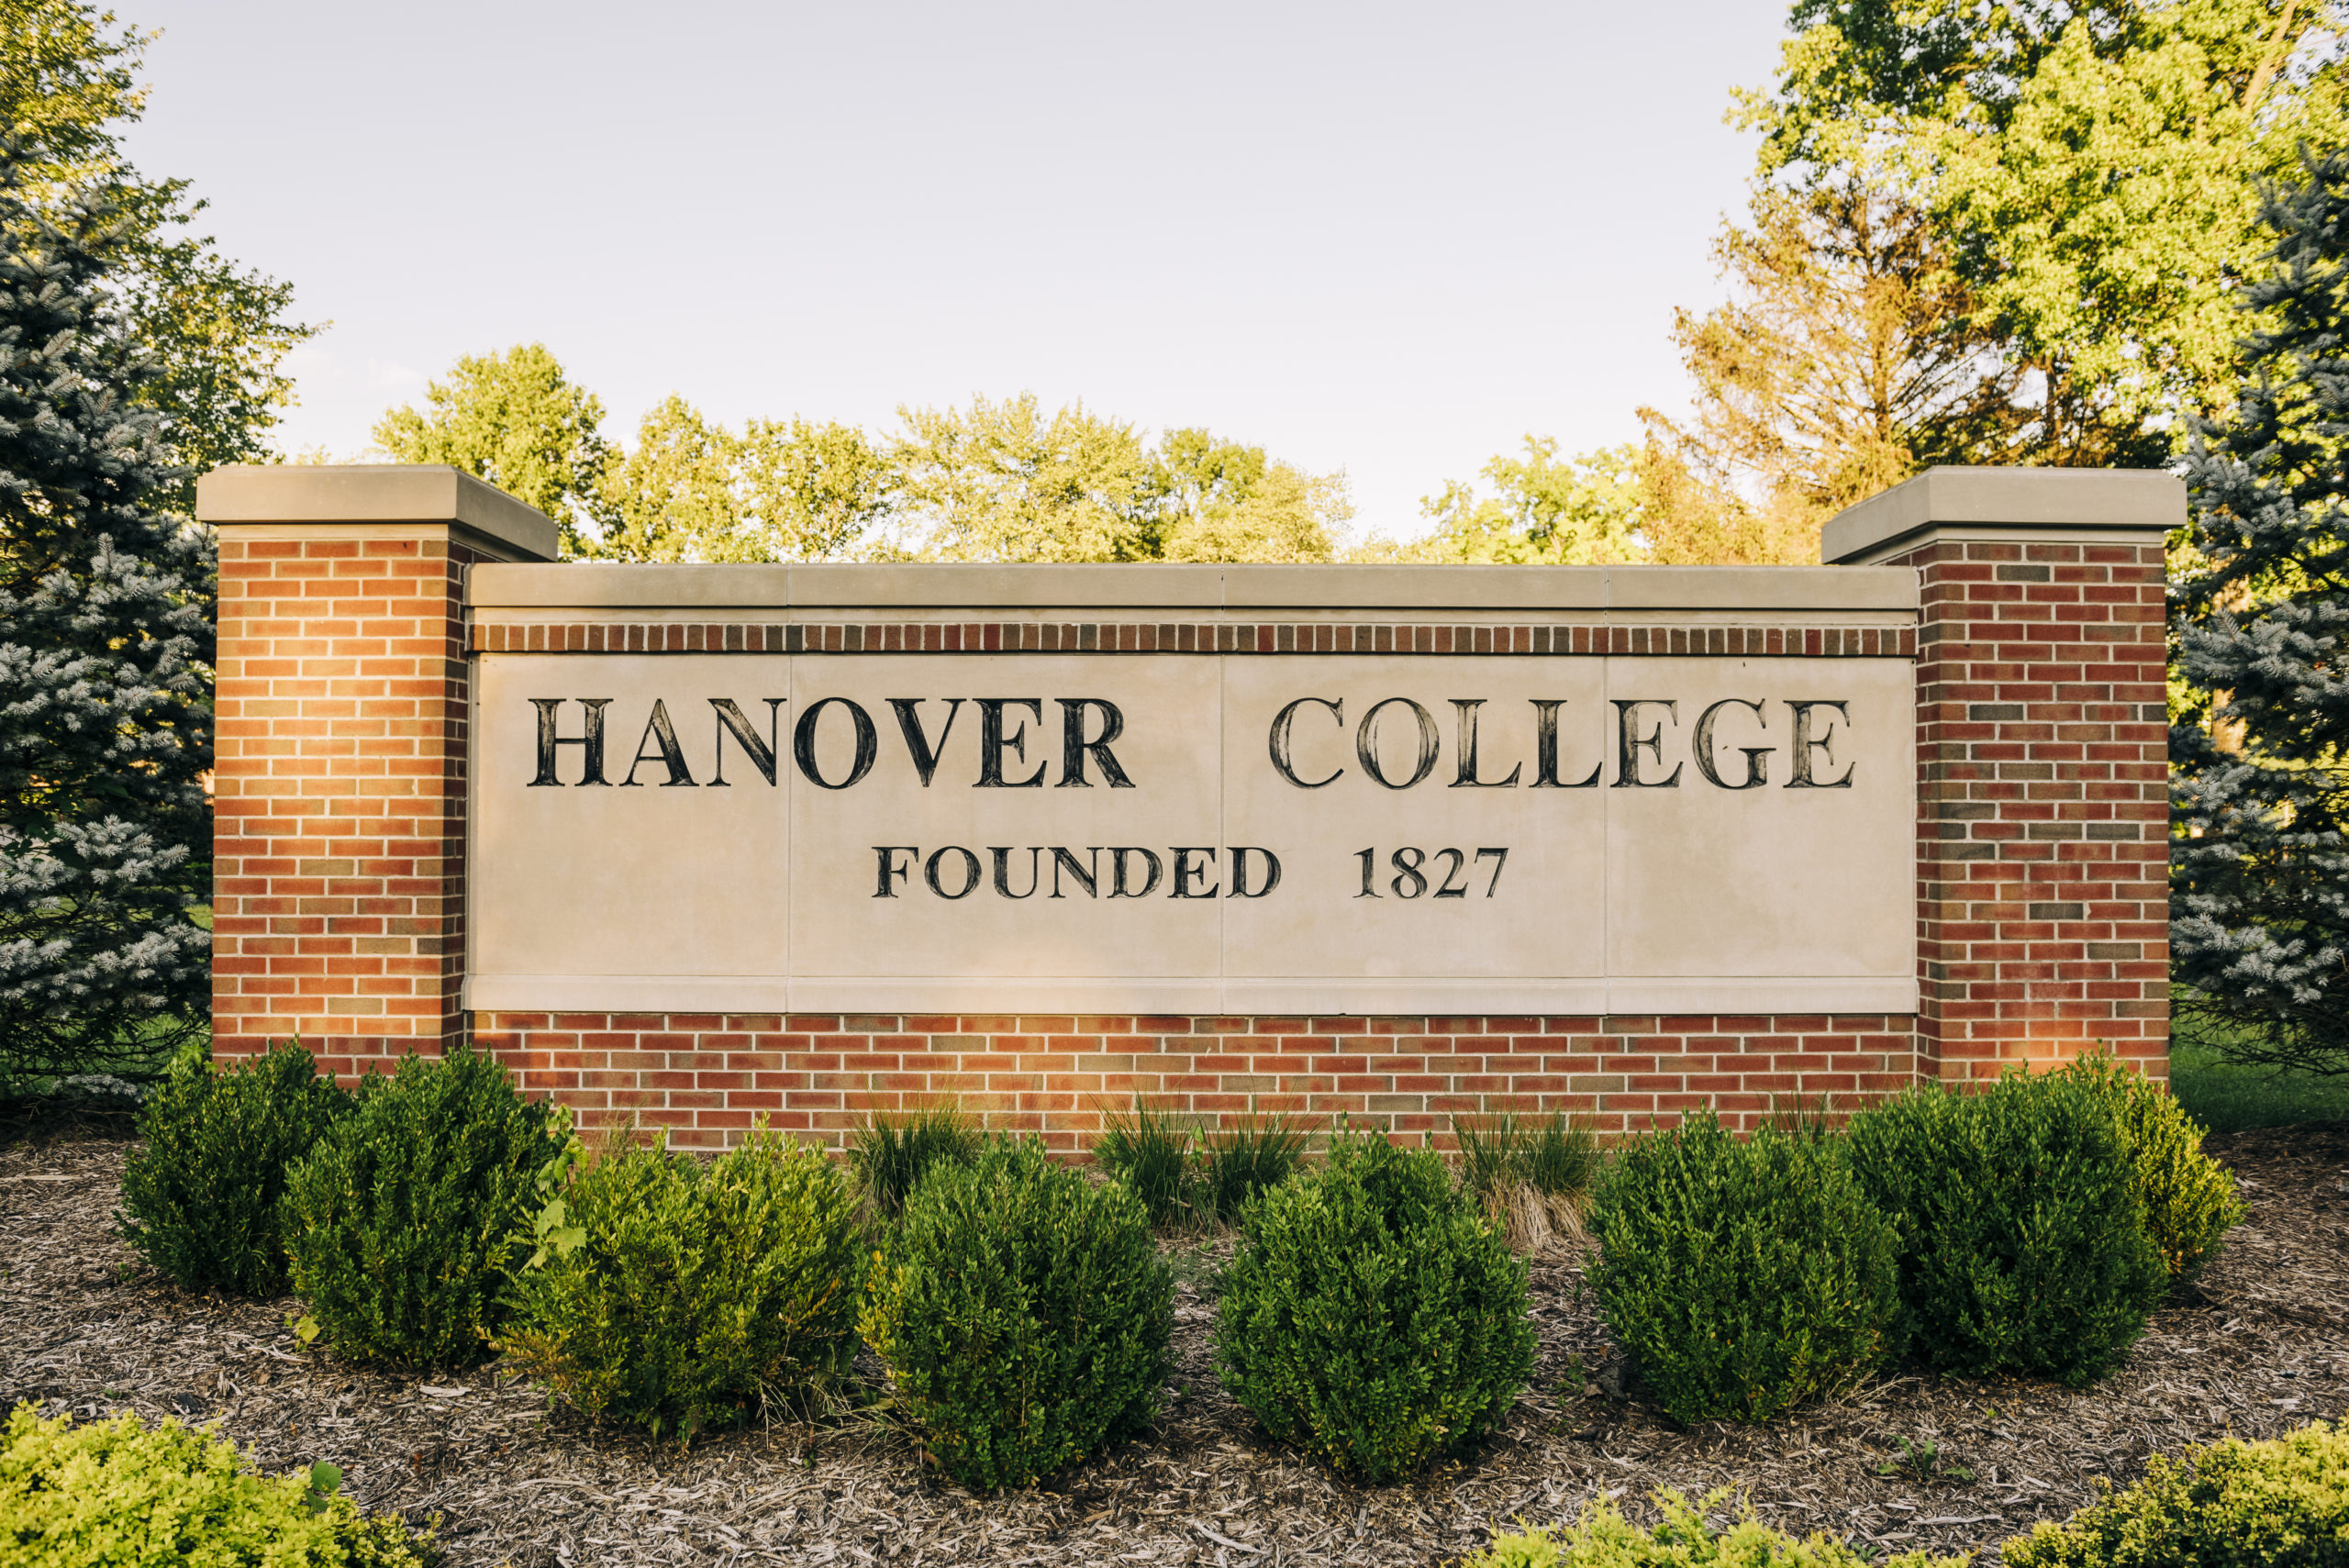 "Hanover College Founded 1827" sign